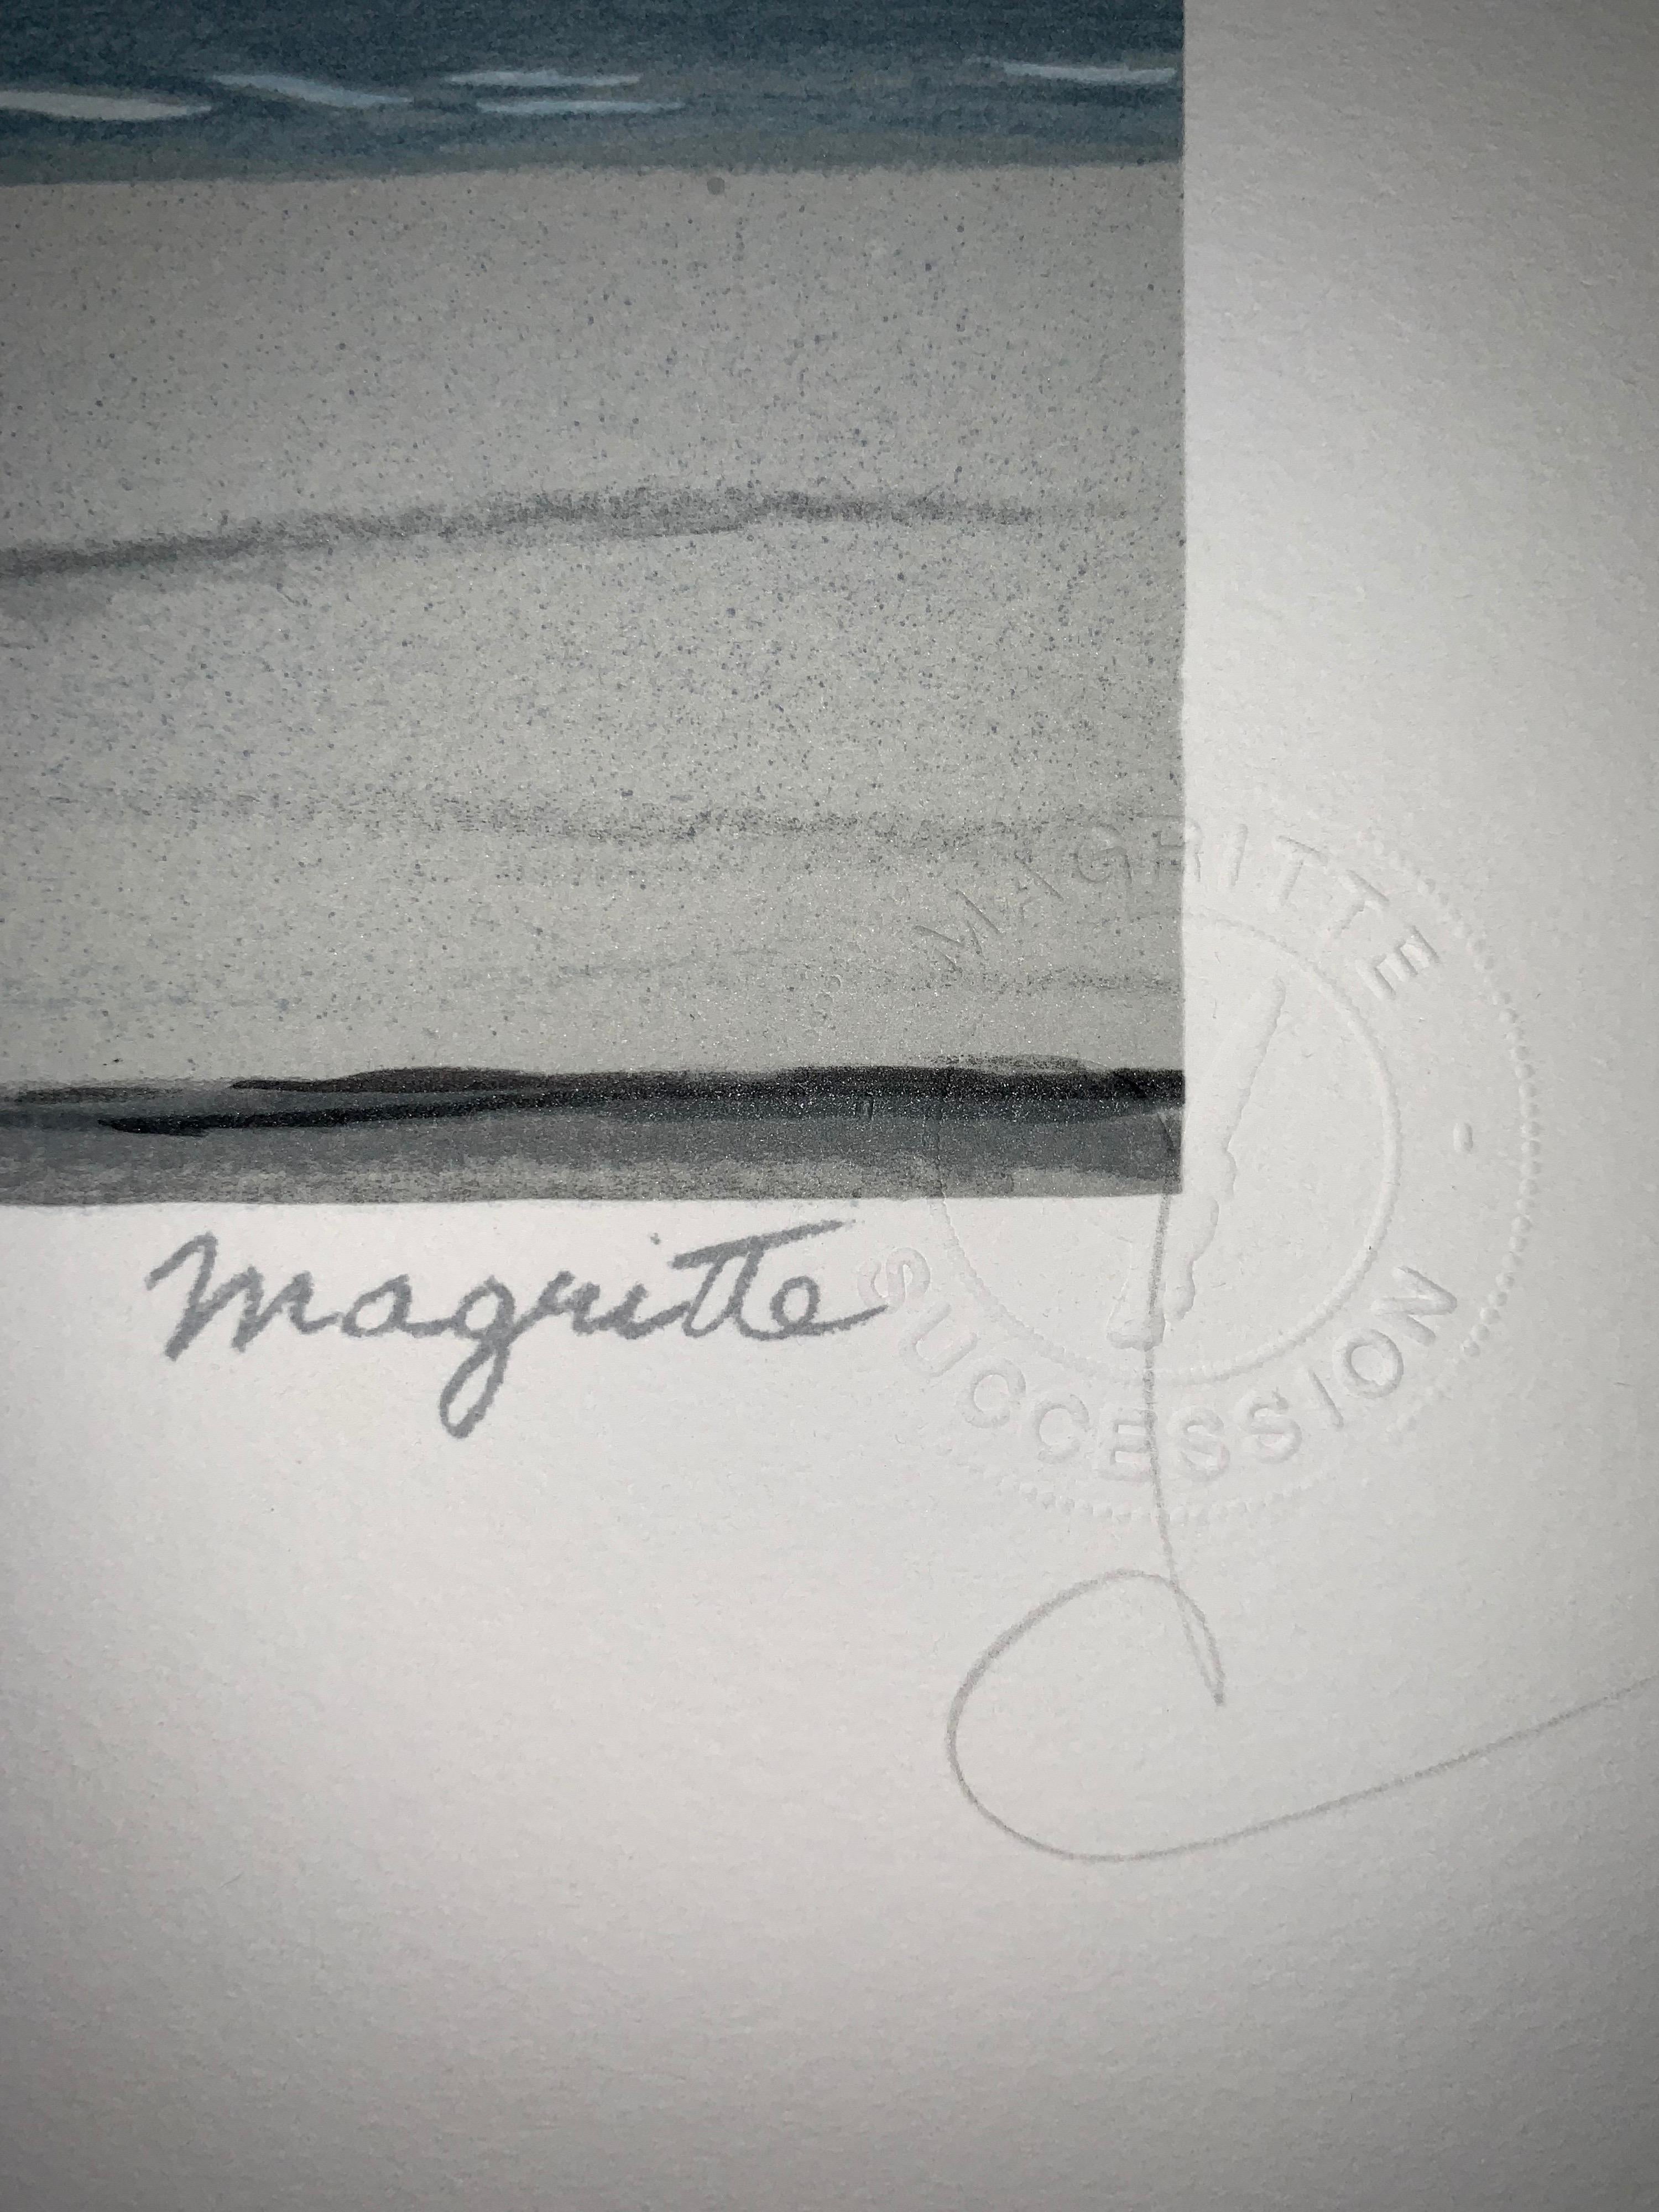 Color lithograph after the 1952 oil on canvas by René Magritte, printed signature of Magritte and numbered from the edition of 275. 
The lithograph features the dry stamps of the Magritte Foundation & ADAGP and is countersigned in pencil by Mr.